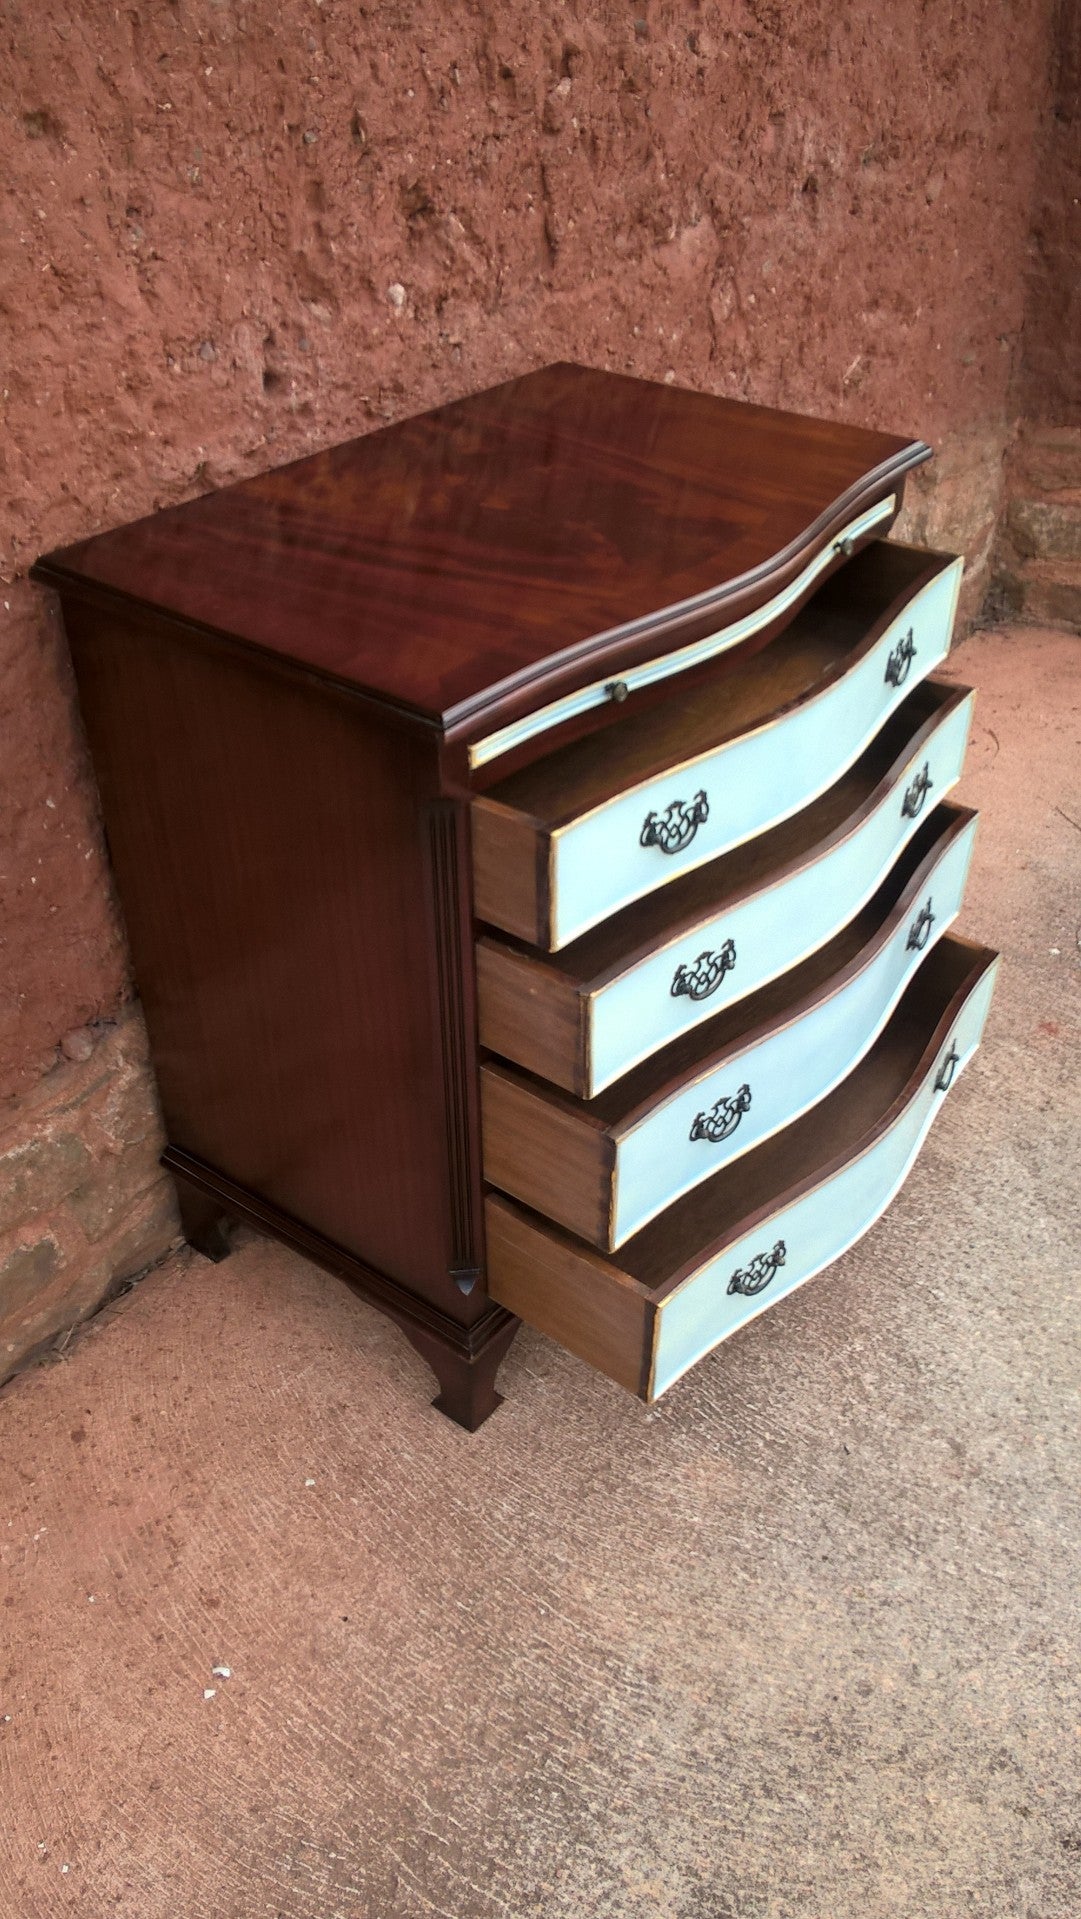 Gorgeous Vintage Chest Of Drawers